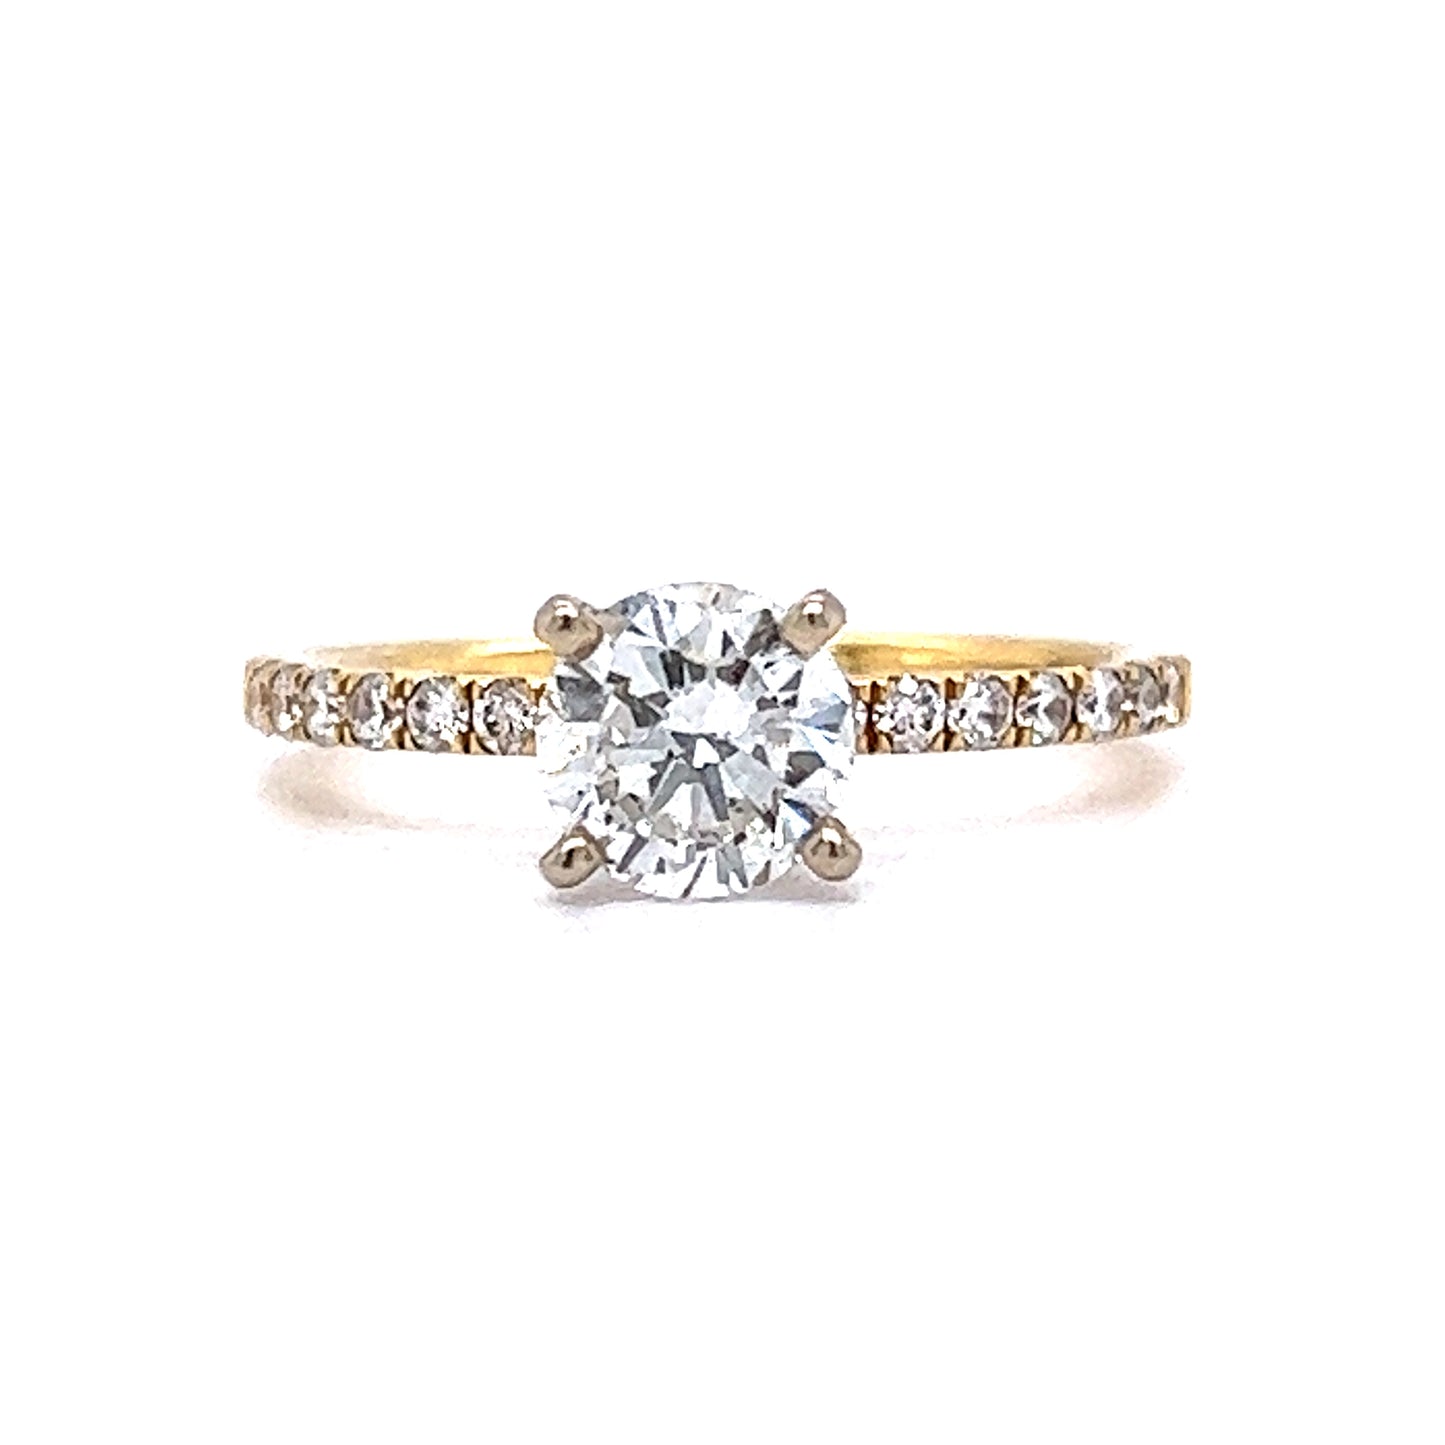 Solitaire 1 Carat Diamond Engagement Ring in 18k Yellow Gold